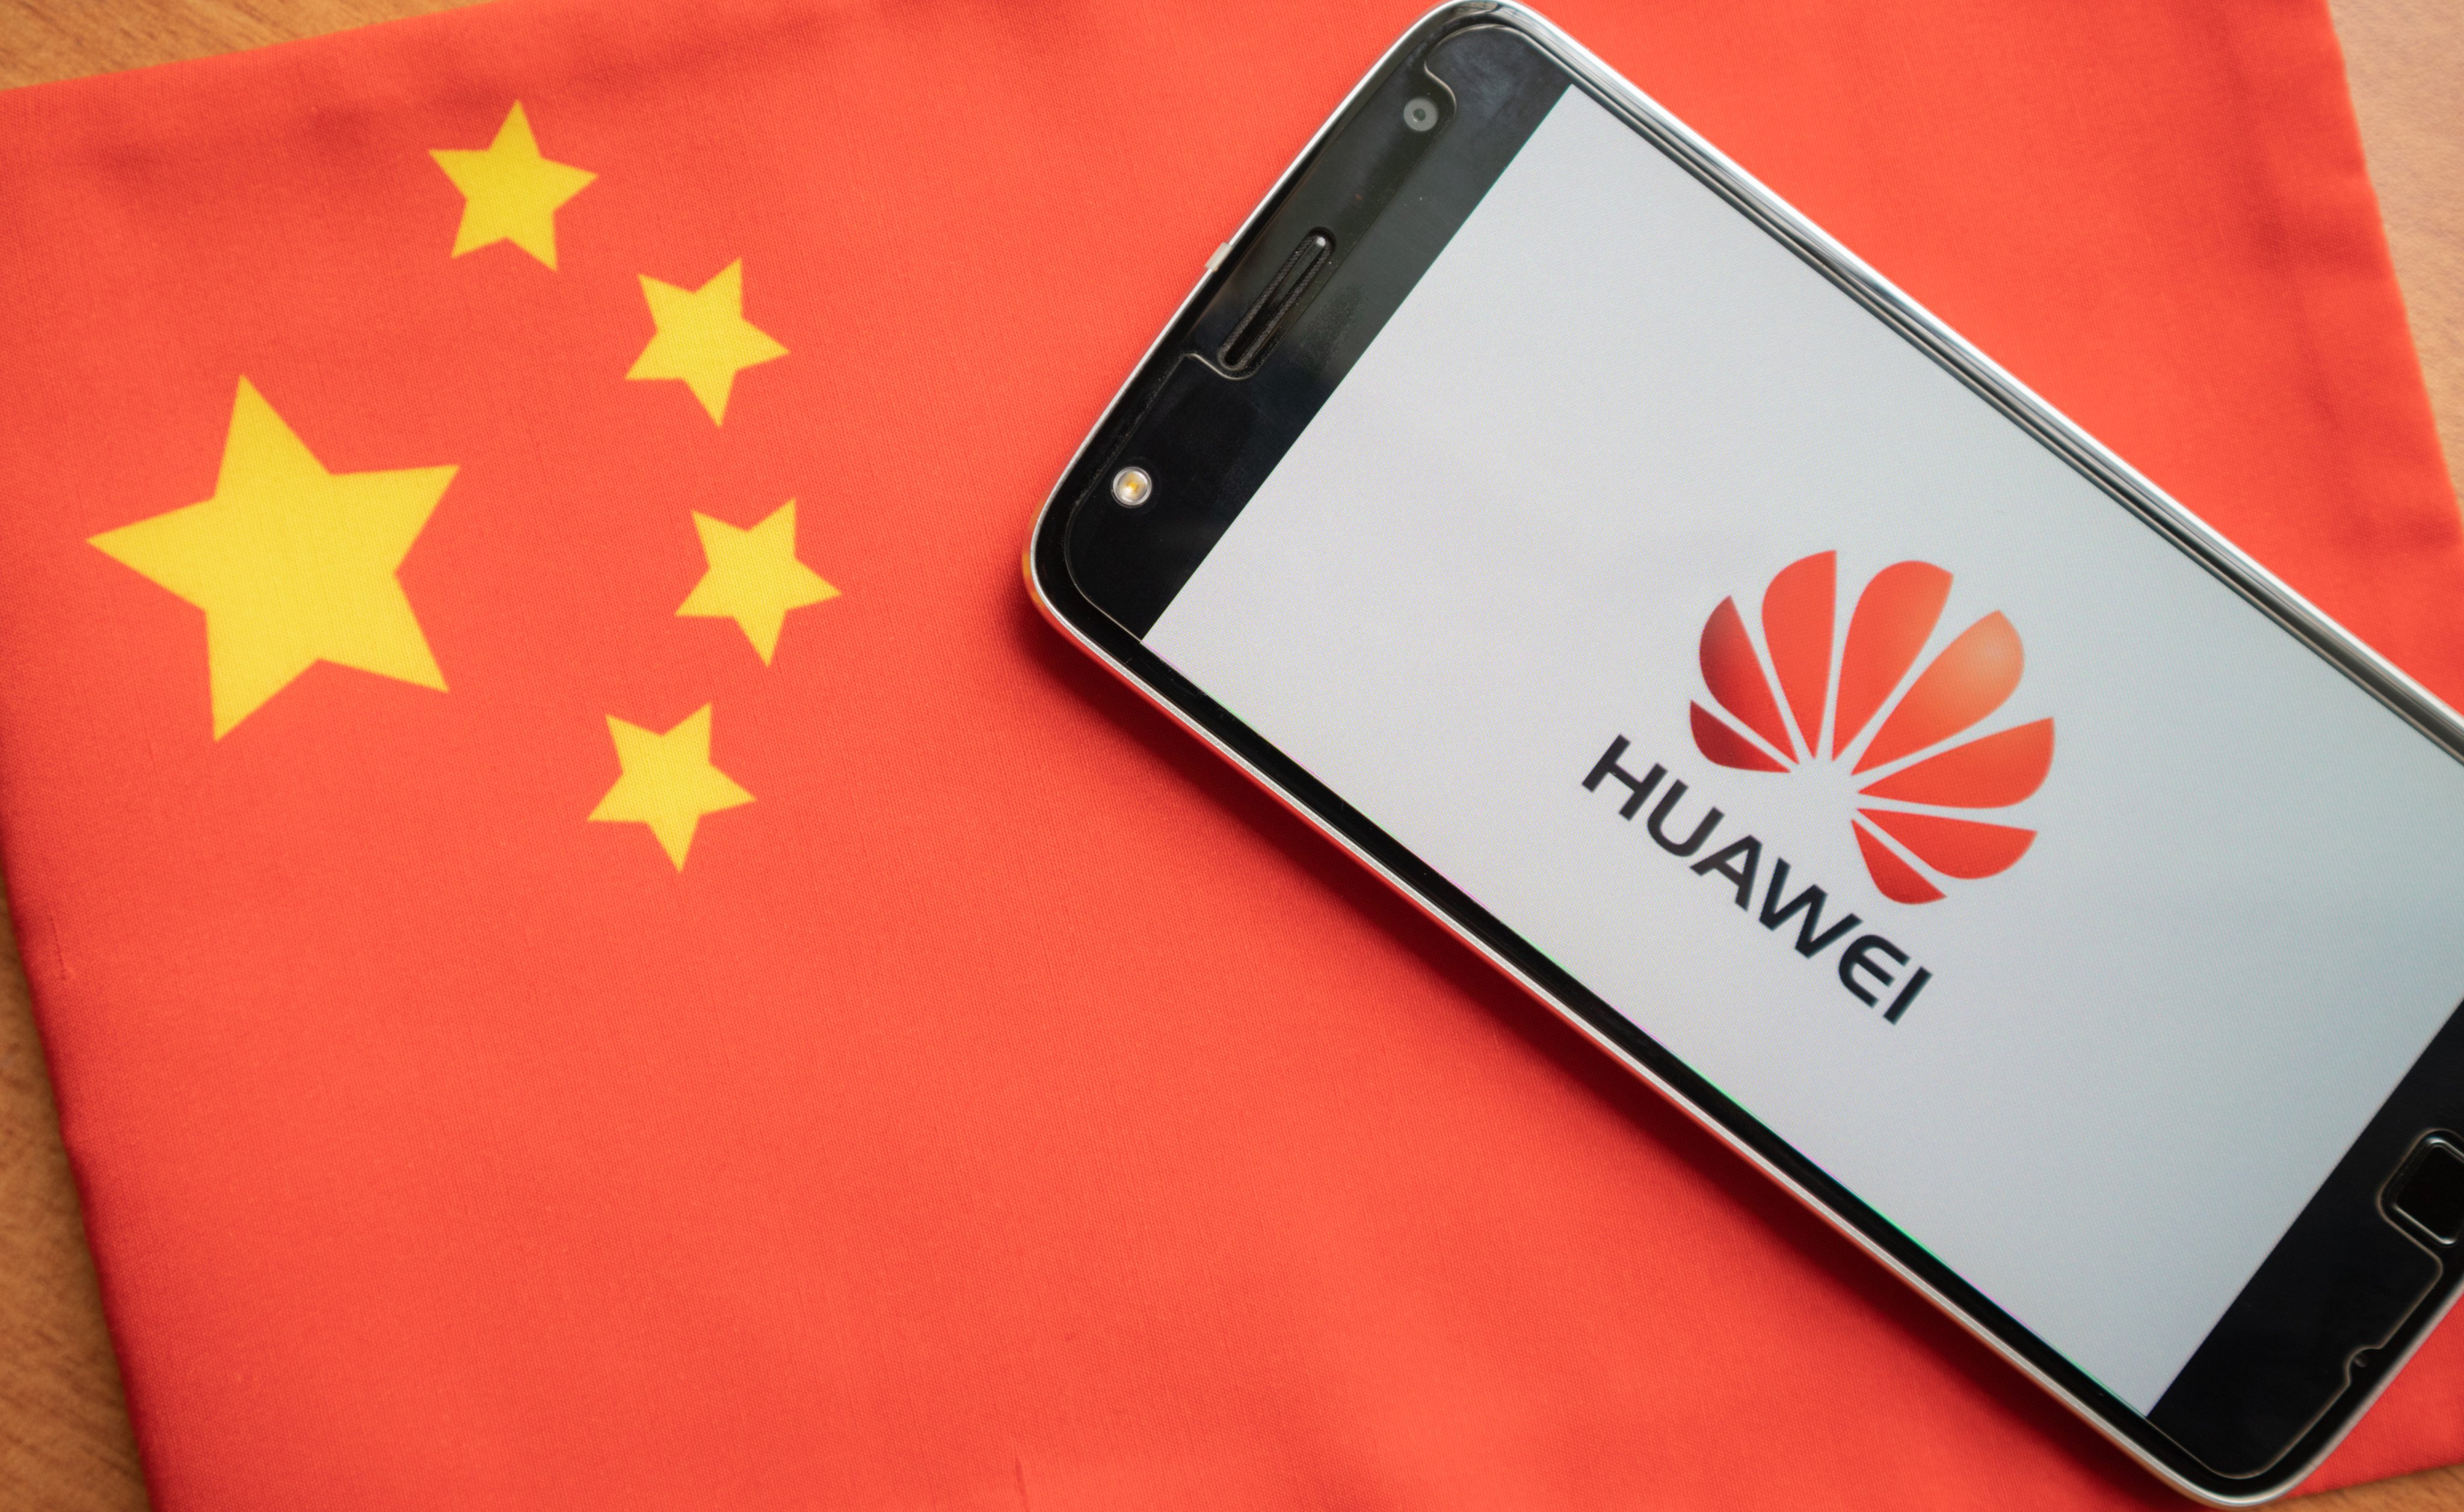 Huawei Technologies Co has set up dedicated business groups to target the application of 5G and other advanced technologies in selected traditional industries, such as ports and hospitals. Photo: Shutterstock